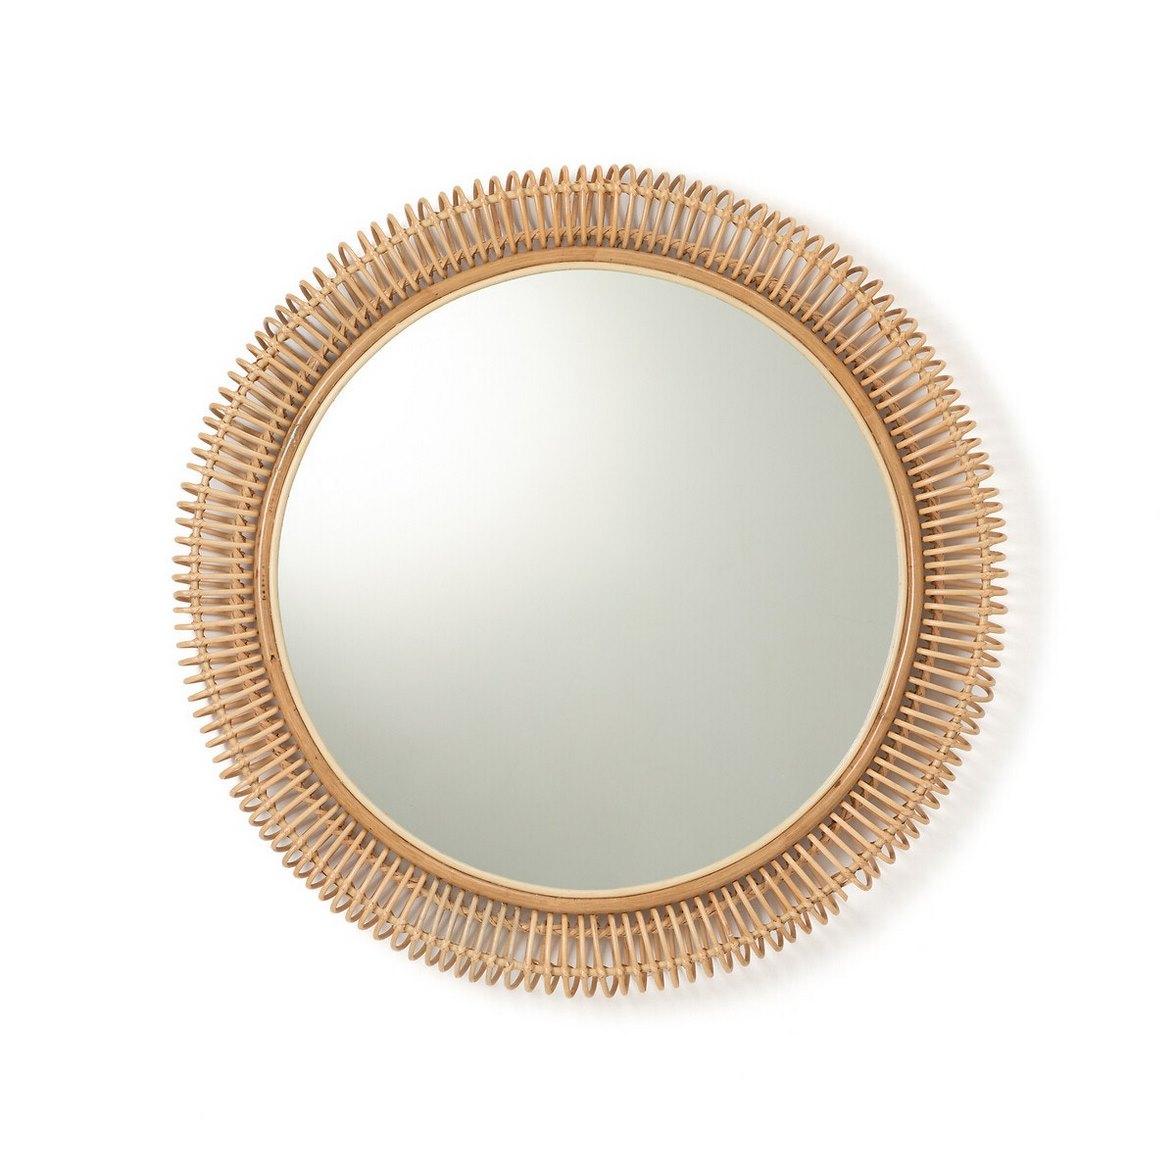 French Design large mirror composed of a round and aerial rattan structure, Bohemian chic design and trendy style!